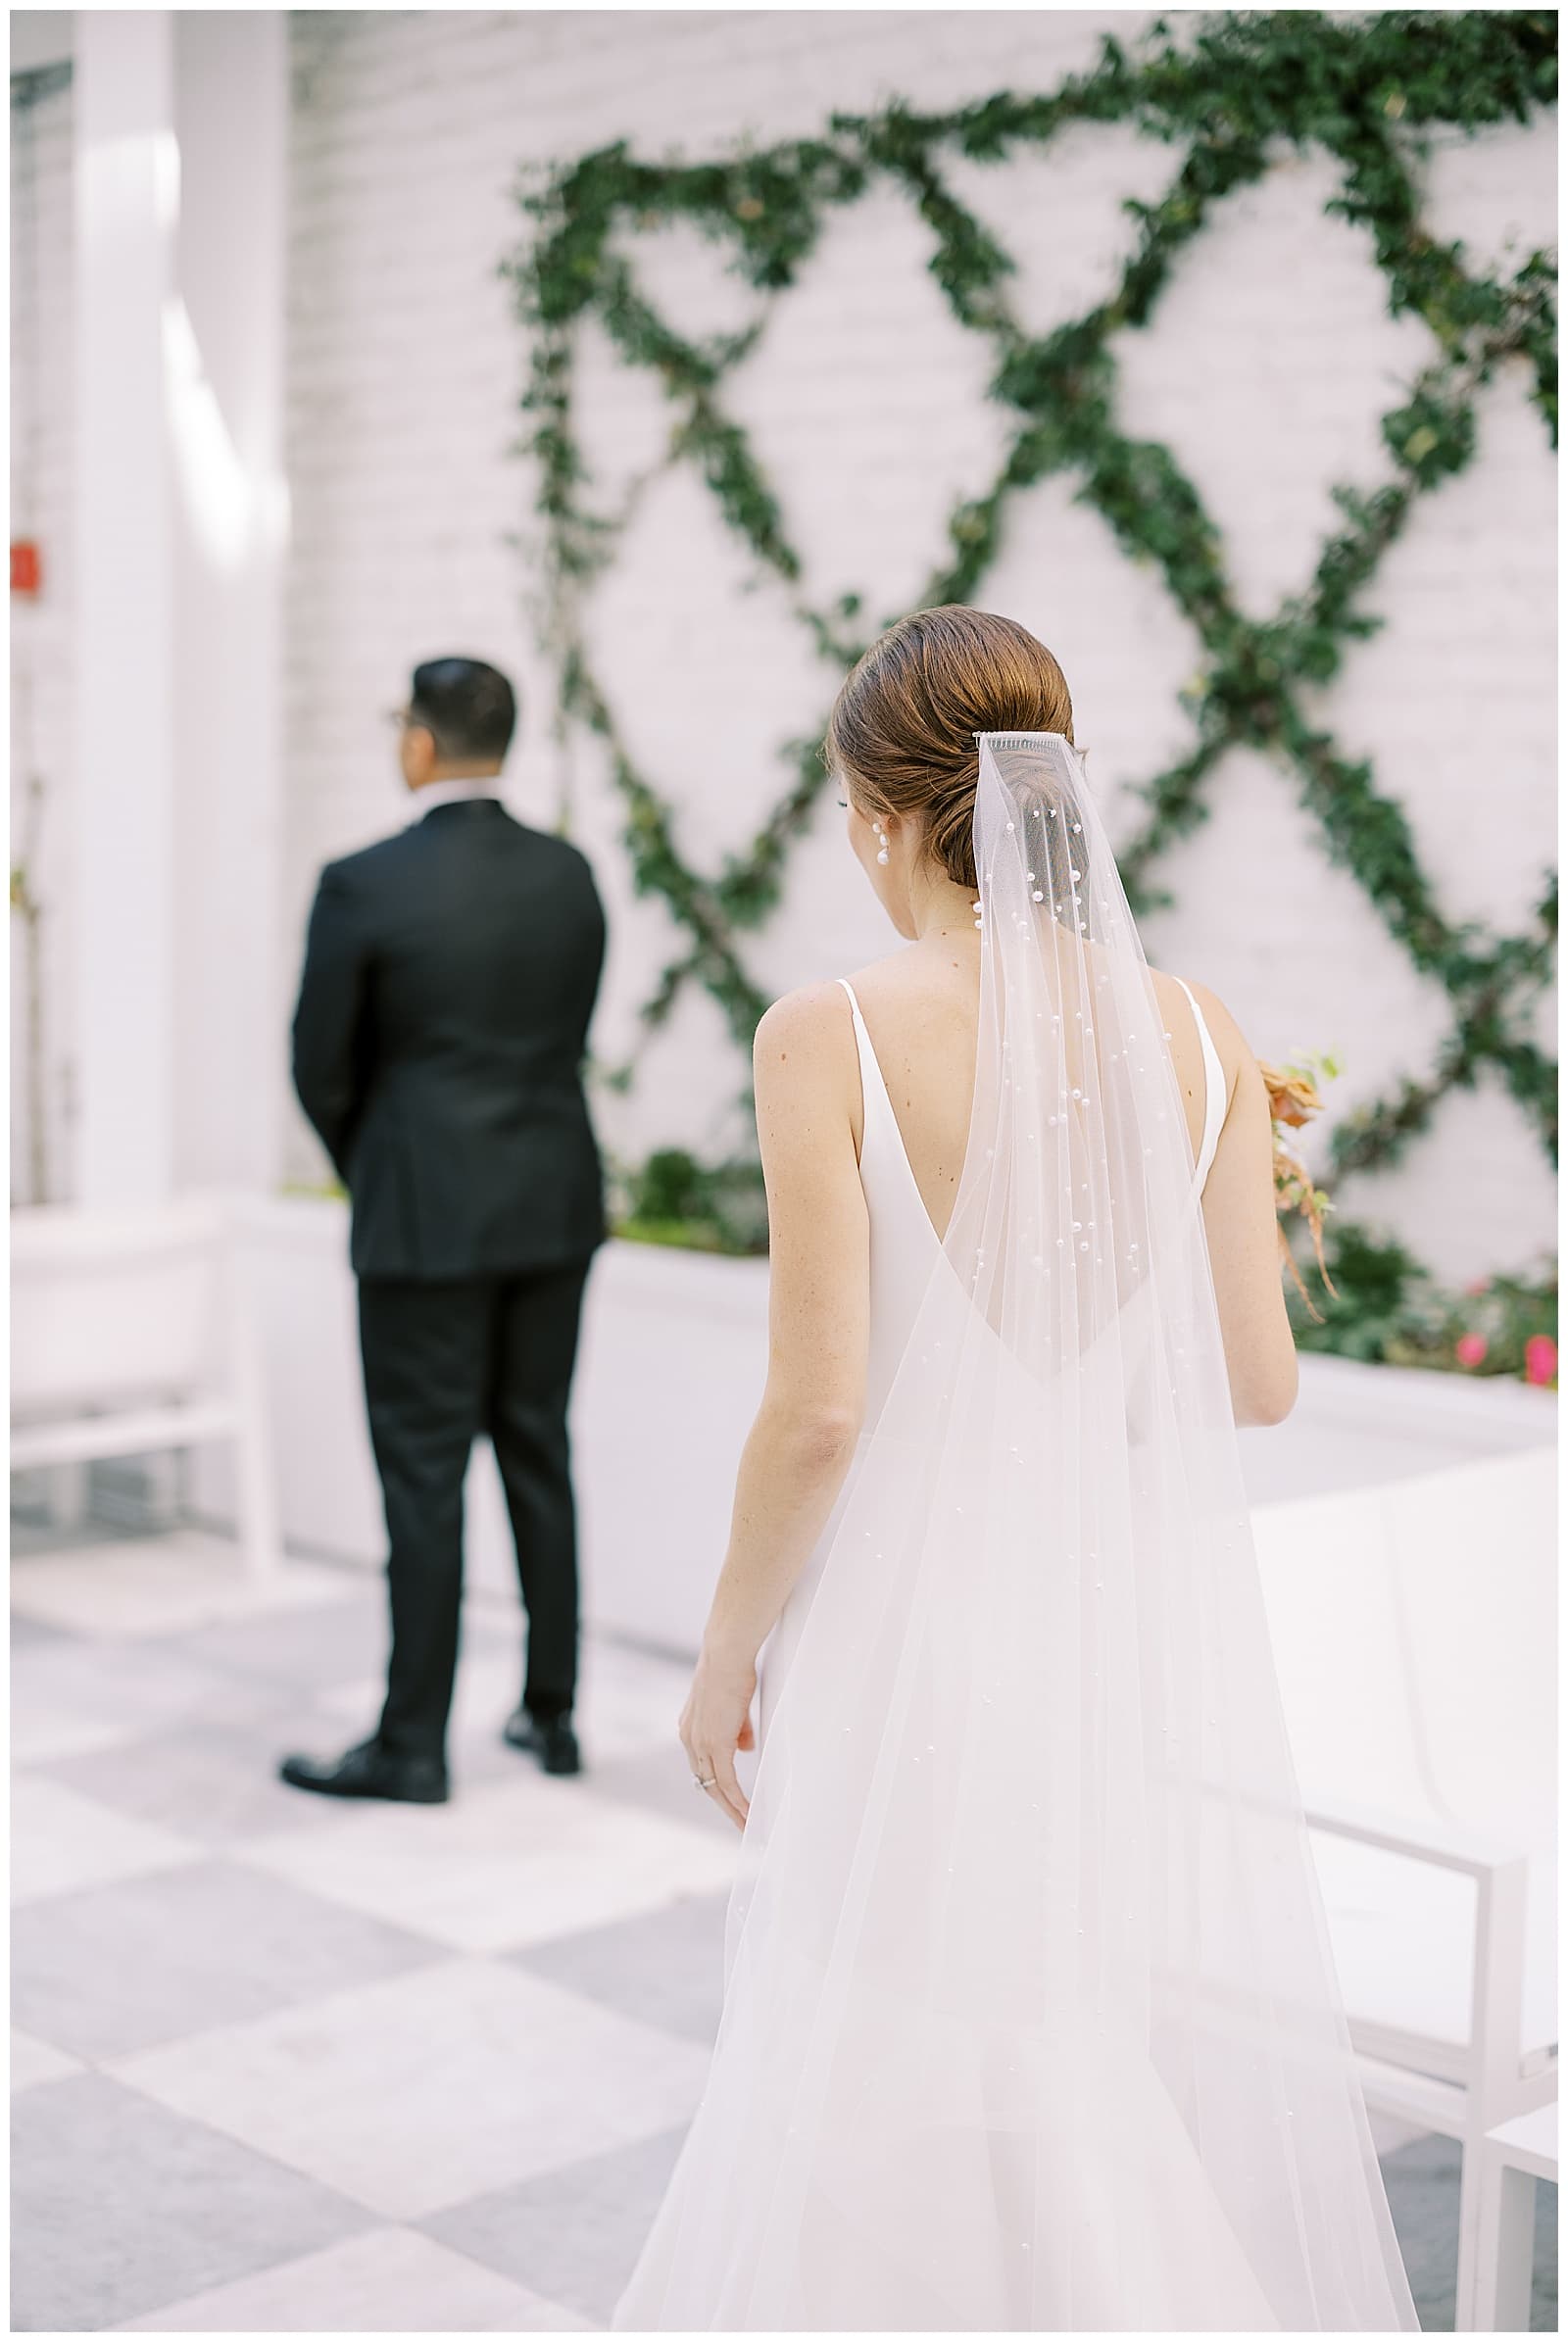 The back view of a bride in a white wedding dress with a long white veil walking across the courtyard of the Quirk hotel richmond to a young man in a black tuxedo standing away from her 